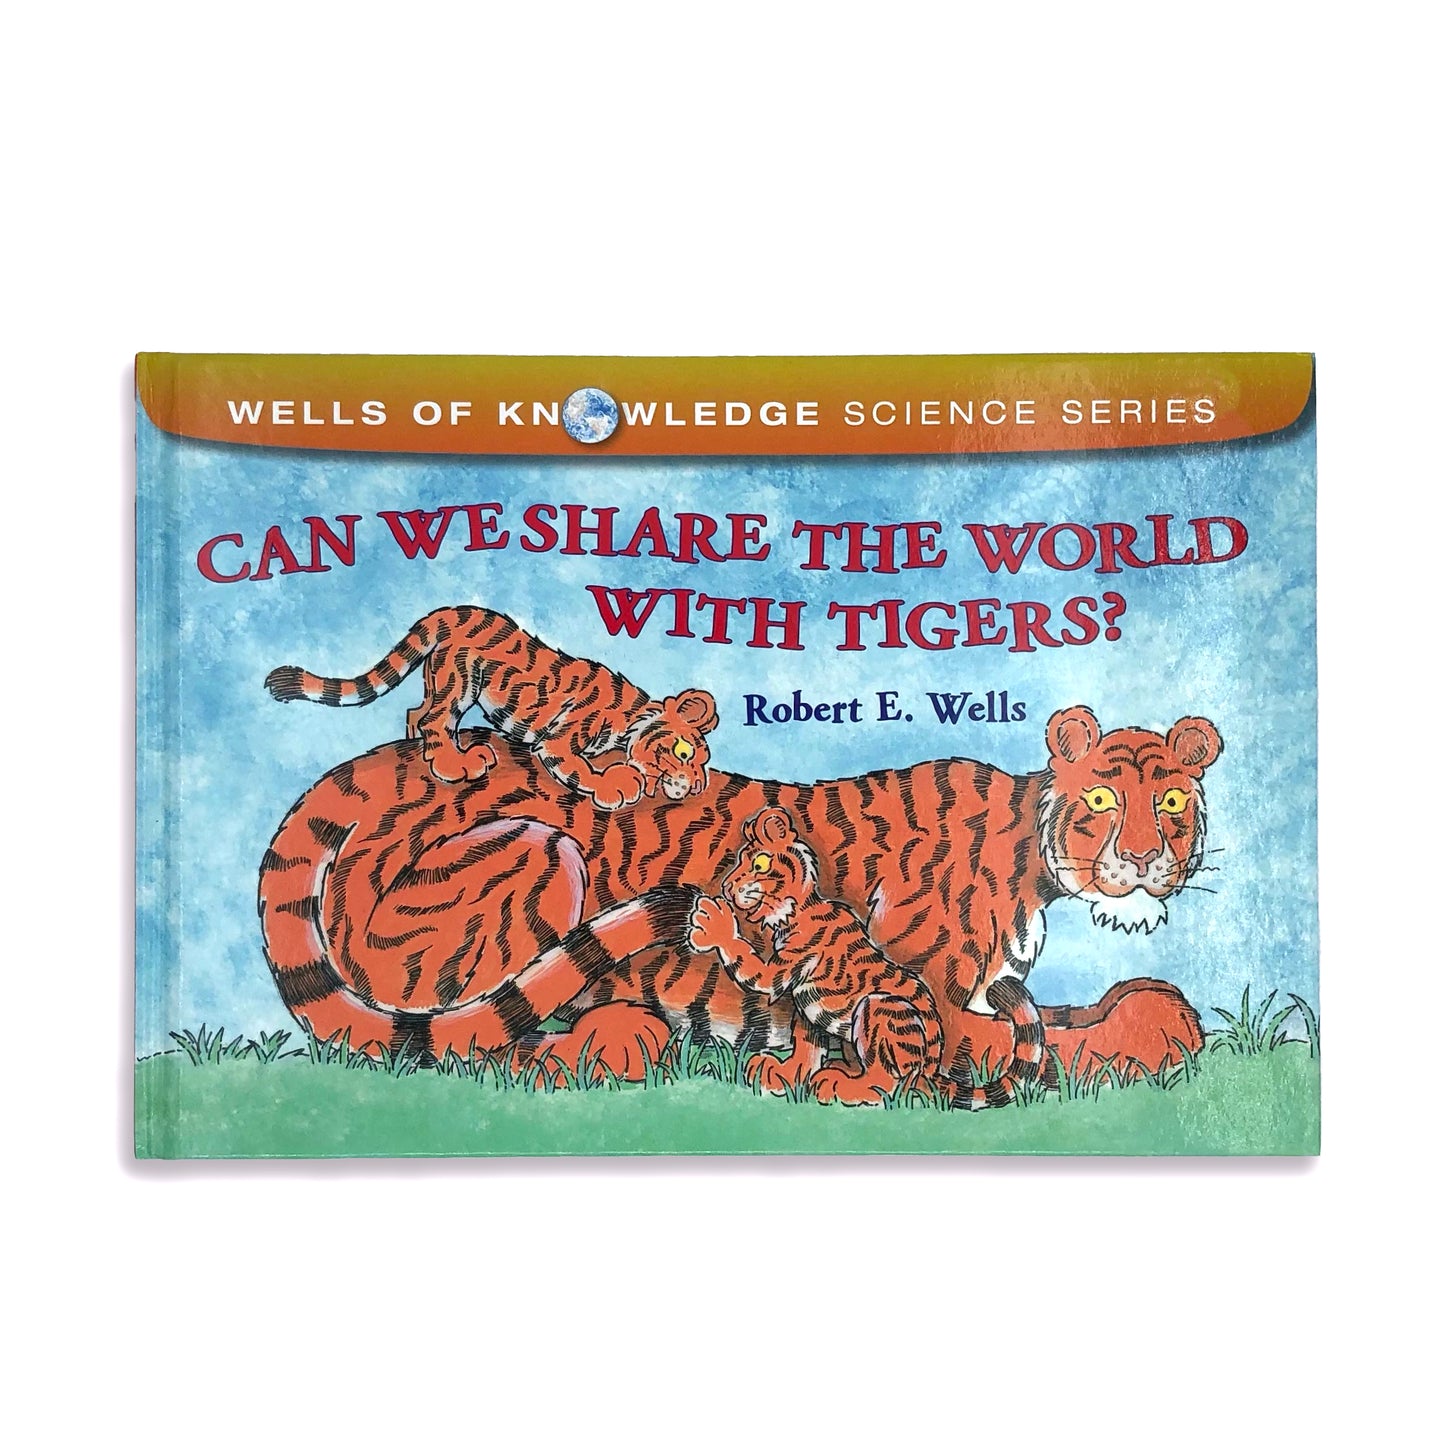 Can We Share the World With Tigers? - Robert E. Wells (hard cover)